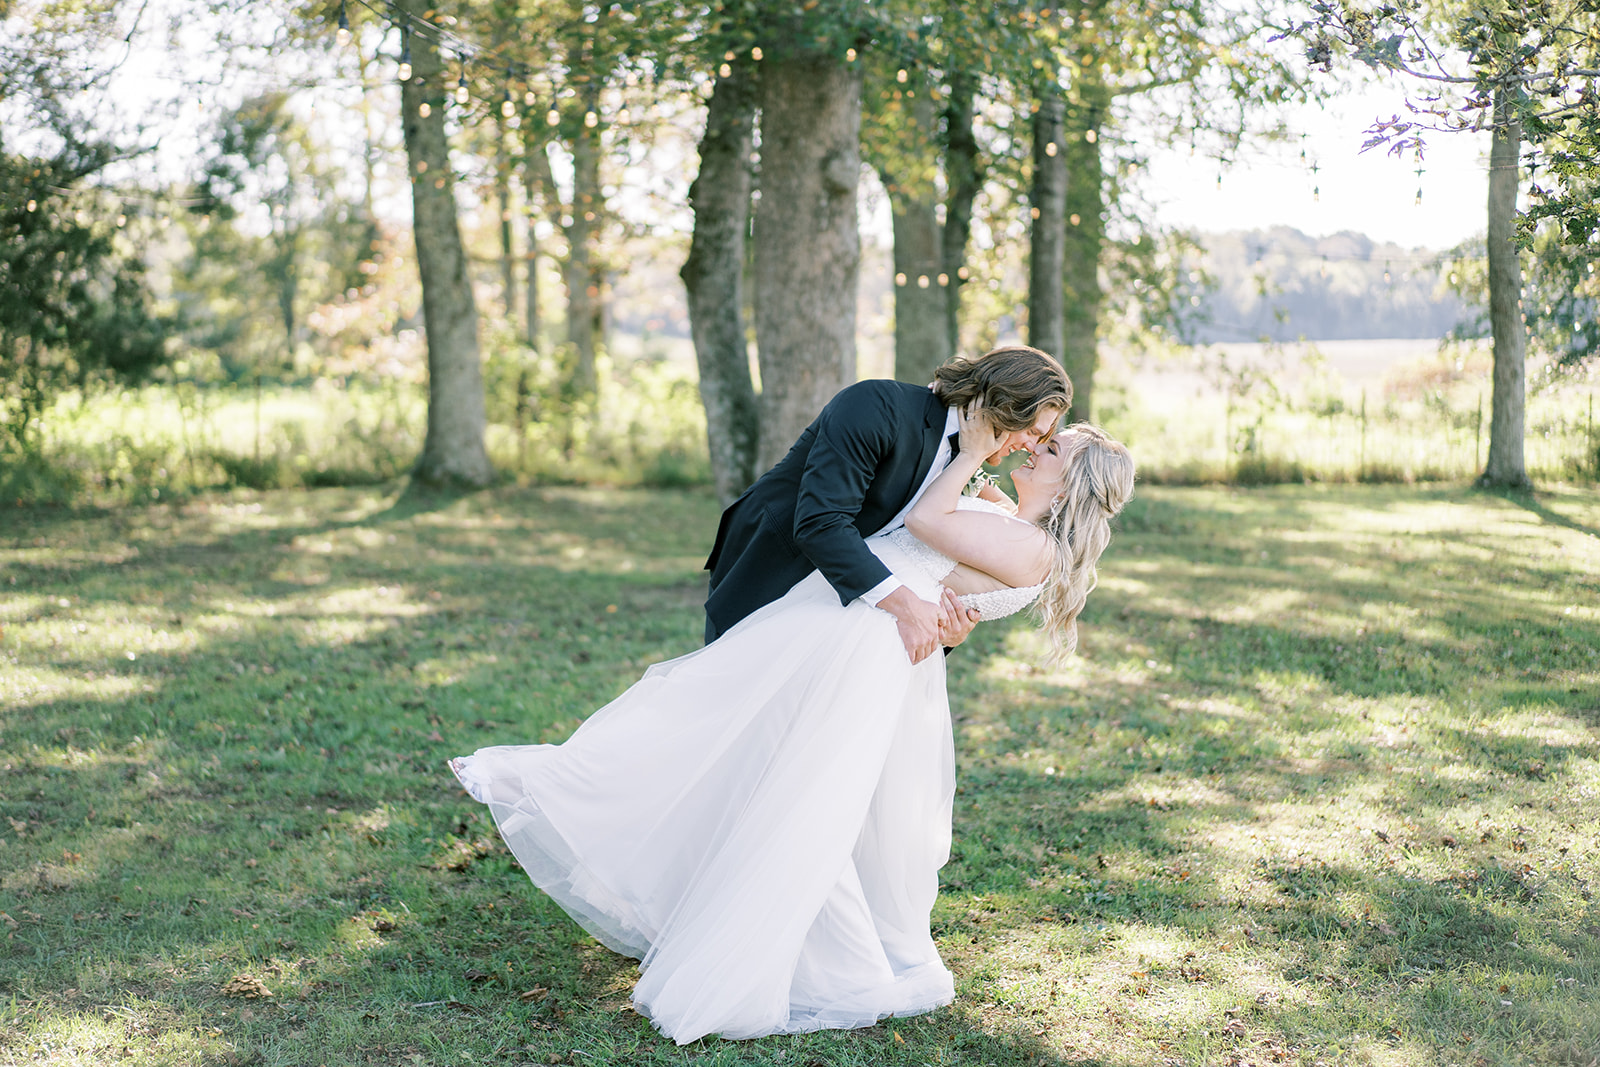 The bride and groom dip for a kiss at Harvest Hollow at their fall wedding